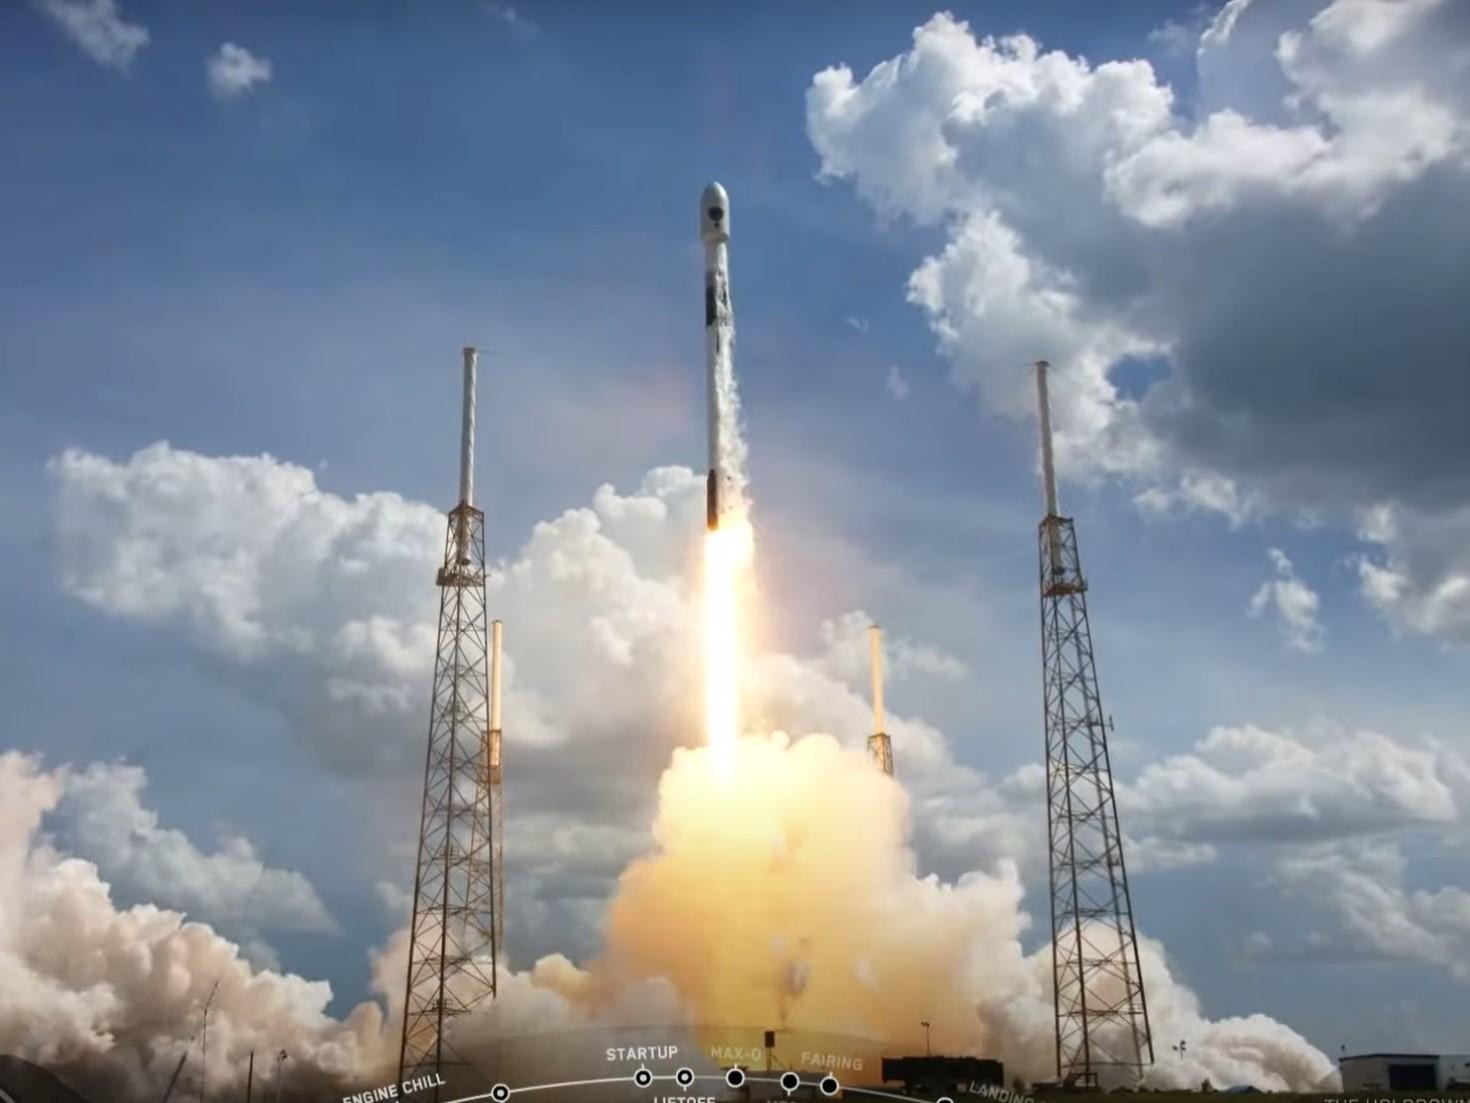 SpaceX launch live: Latest updates as Falcon 9 delivers Elon Musk's Starlink internet satellites into orbit